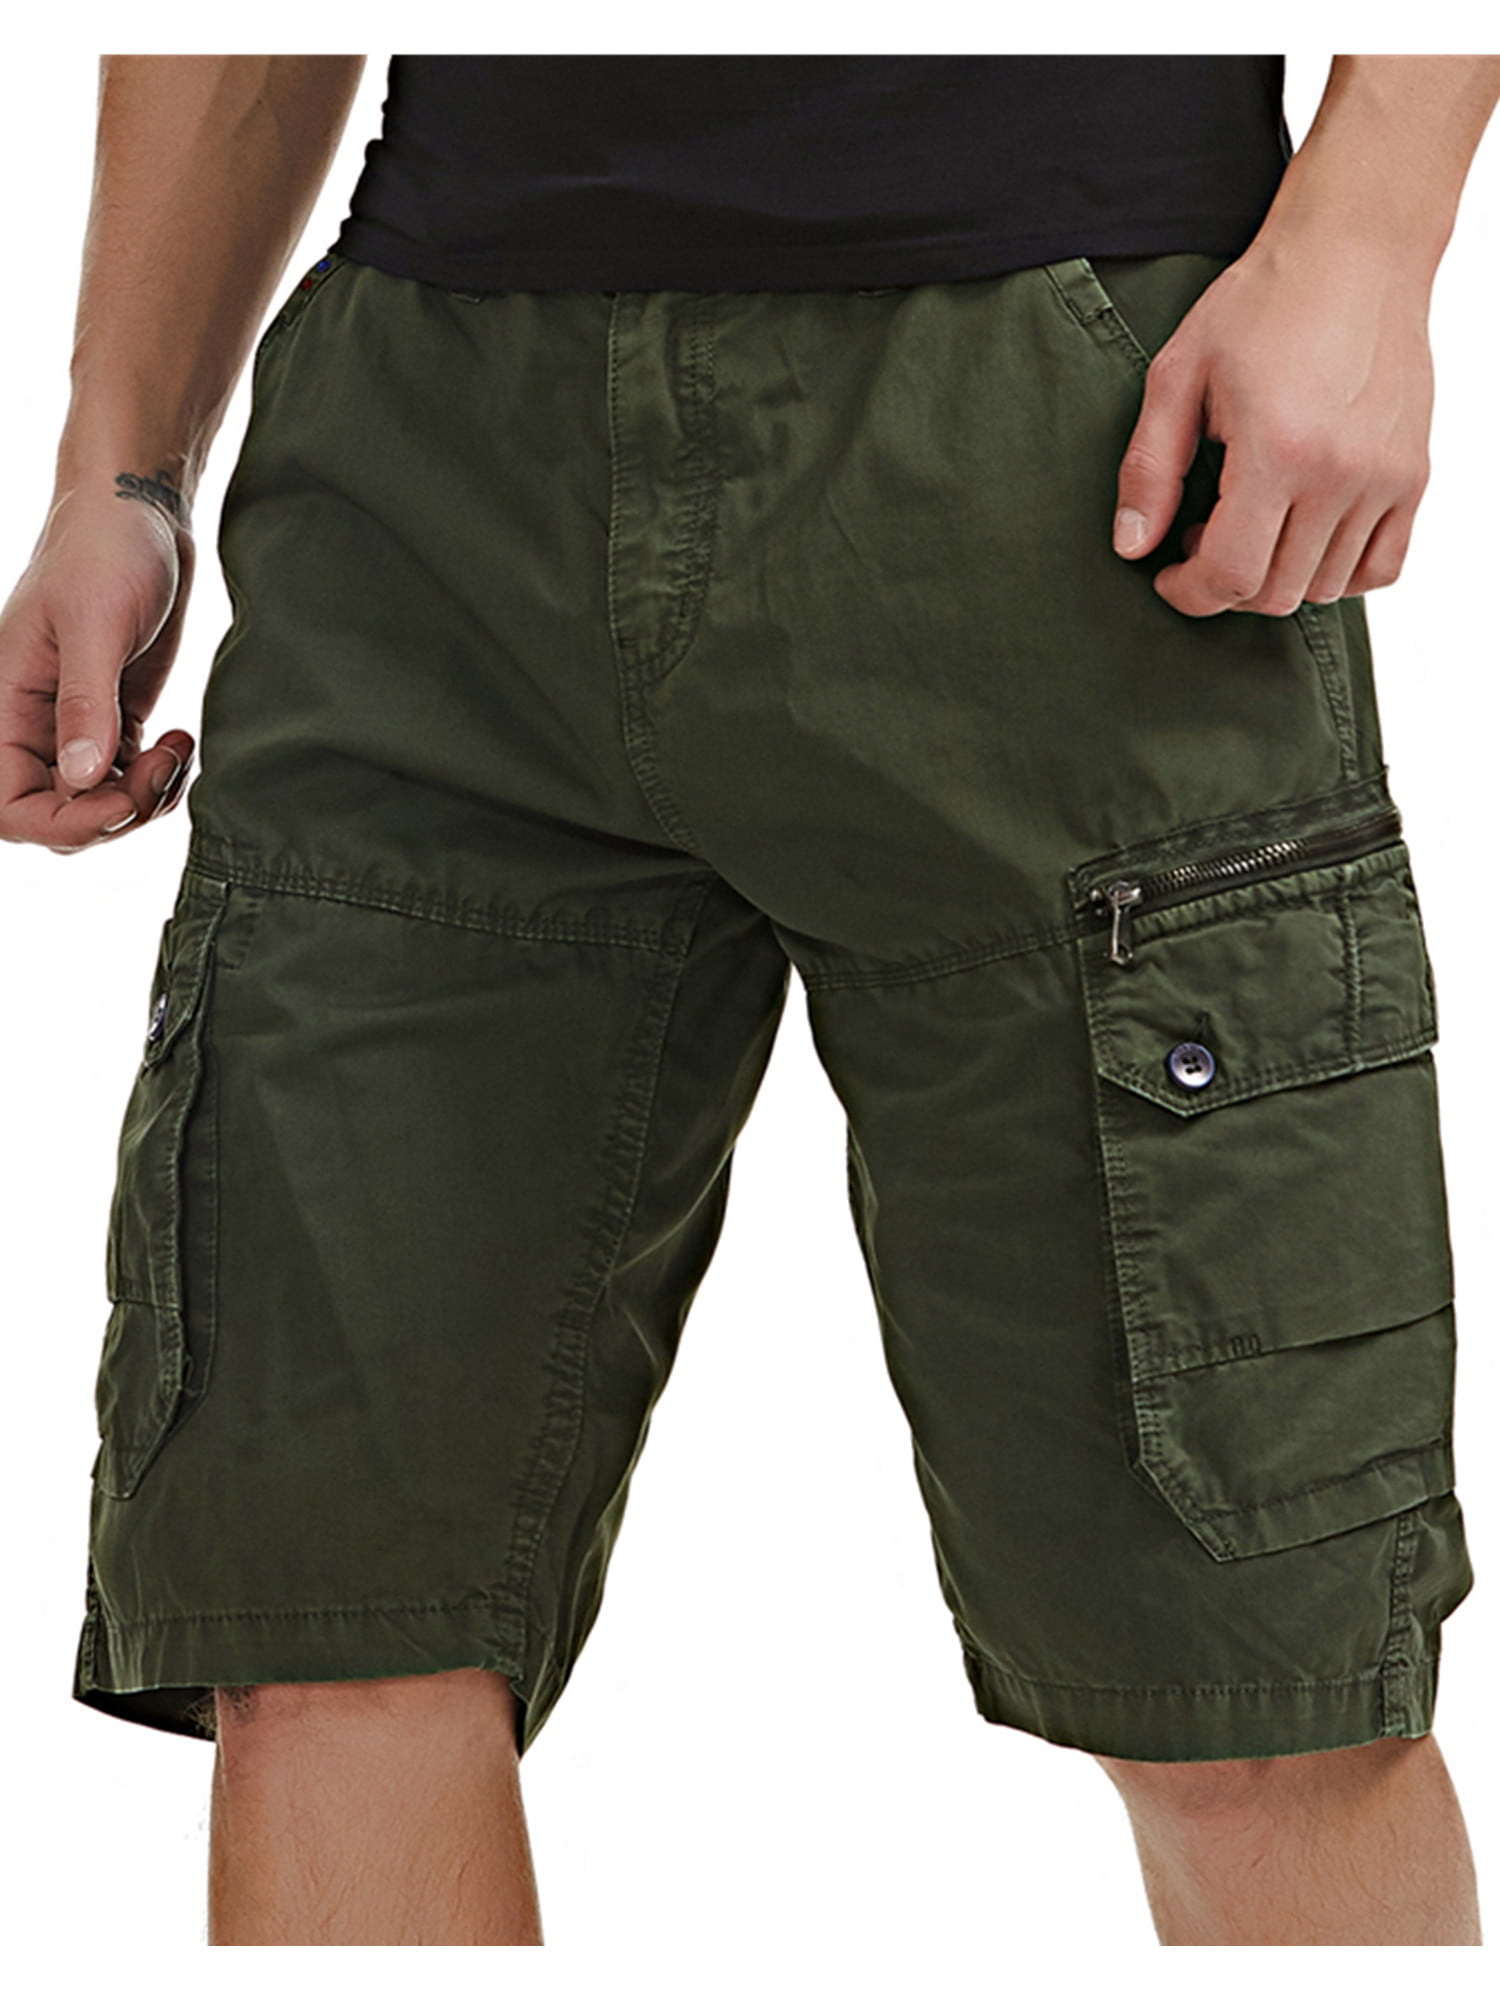 COOFANDY Men Tactical Hiking Shorts Quick Dry Cargo Shorts Lightweight Outdoor Fishing Shorts with Multi-Pockets 